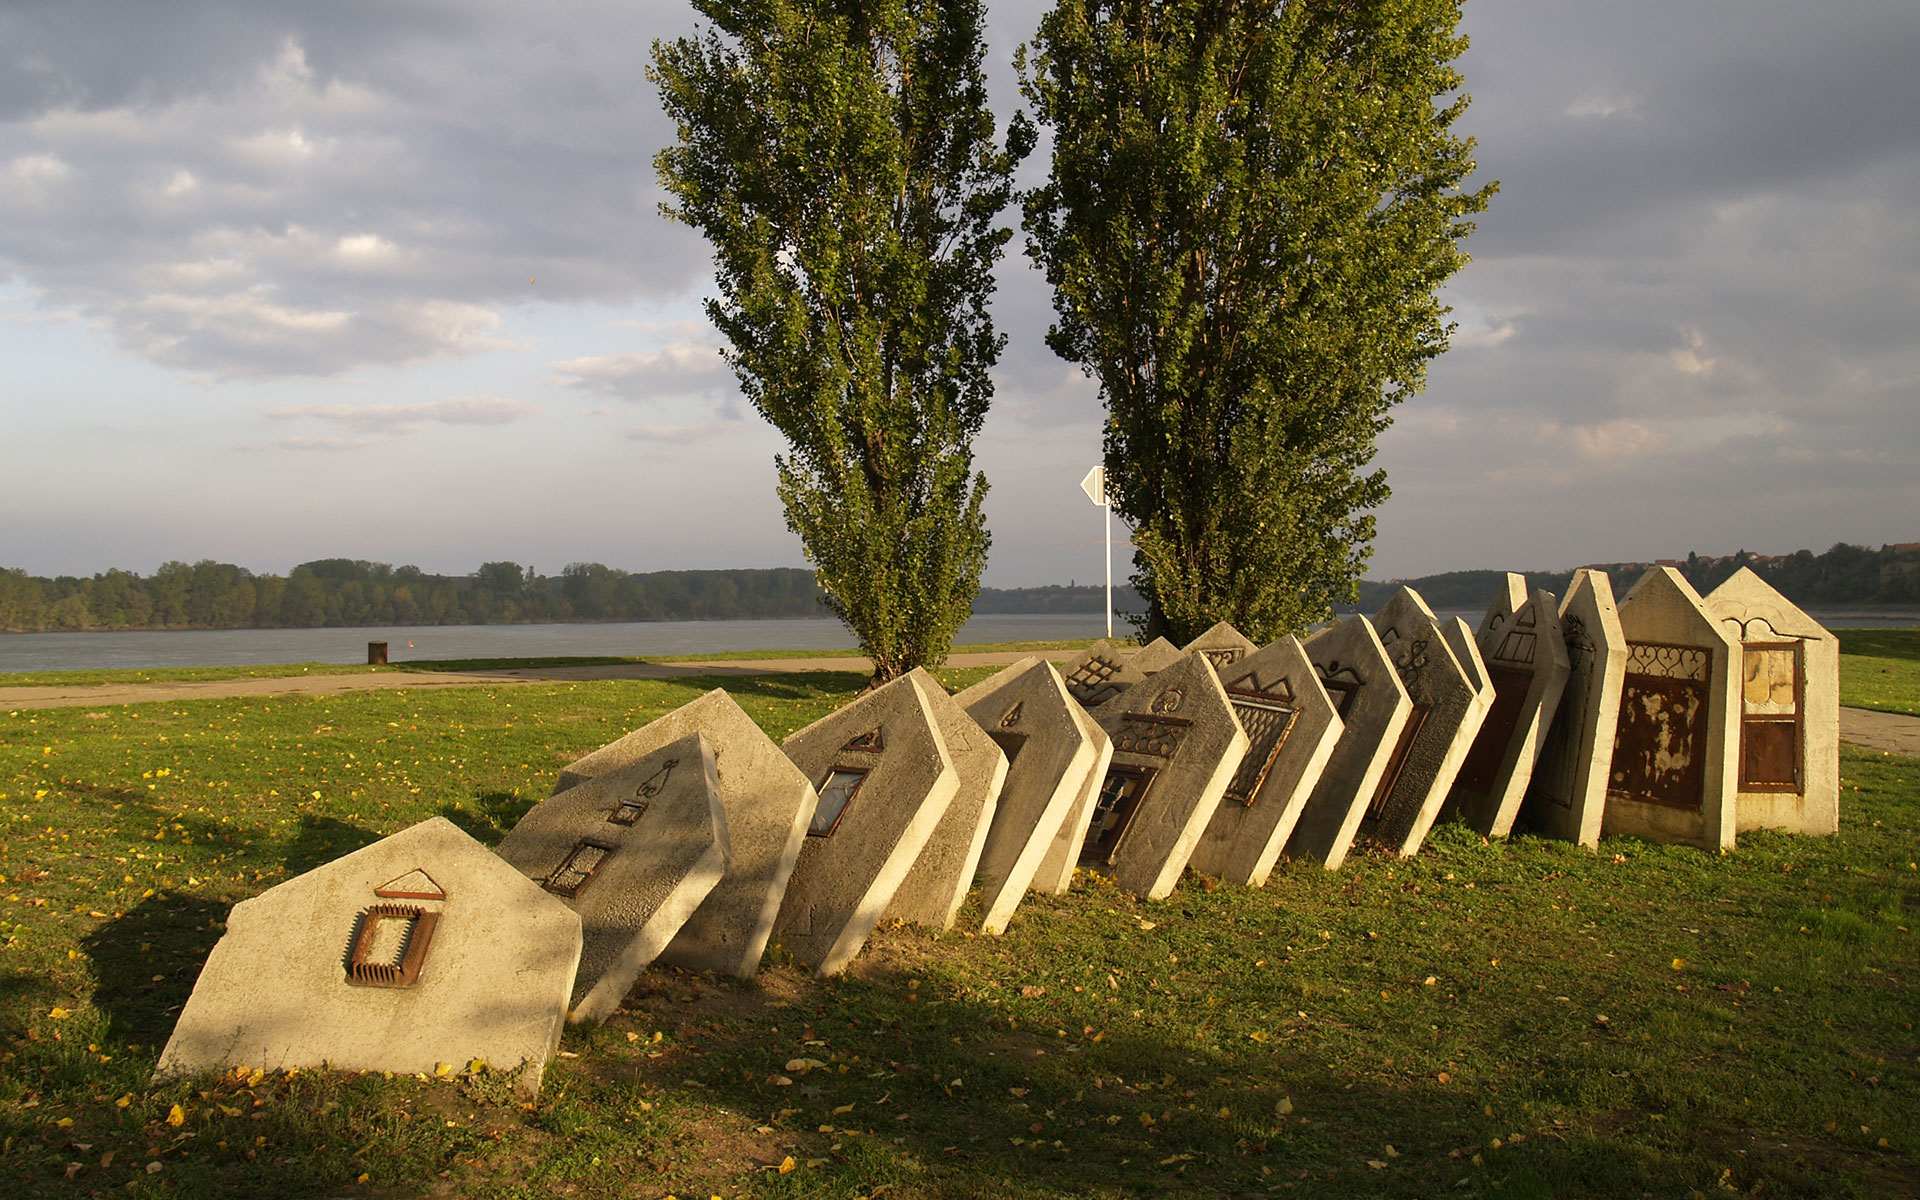 This striking modern art installation on the banks of the Danube in Vukovar recalls the turbulent recent history of eastern Croatia (photo © hidden europe).